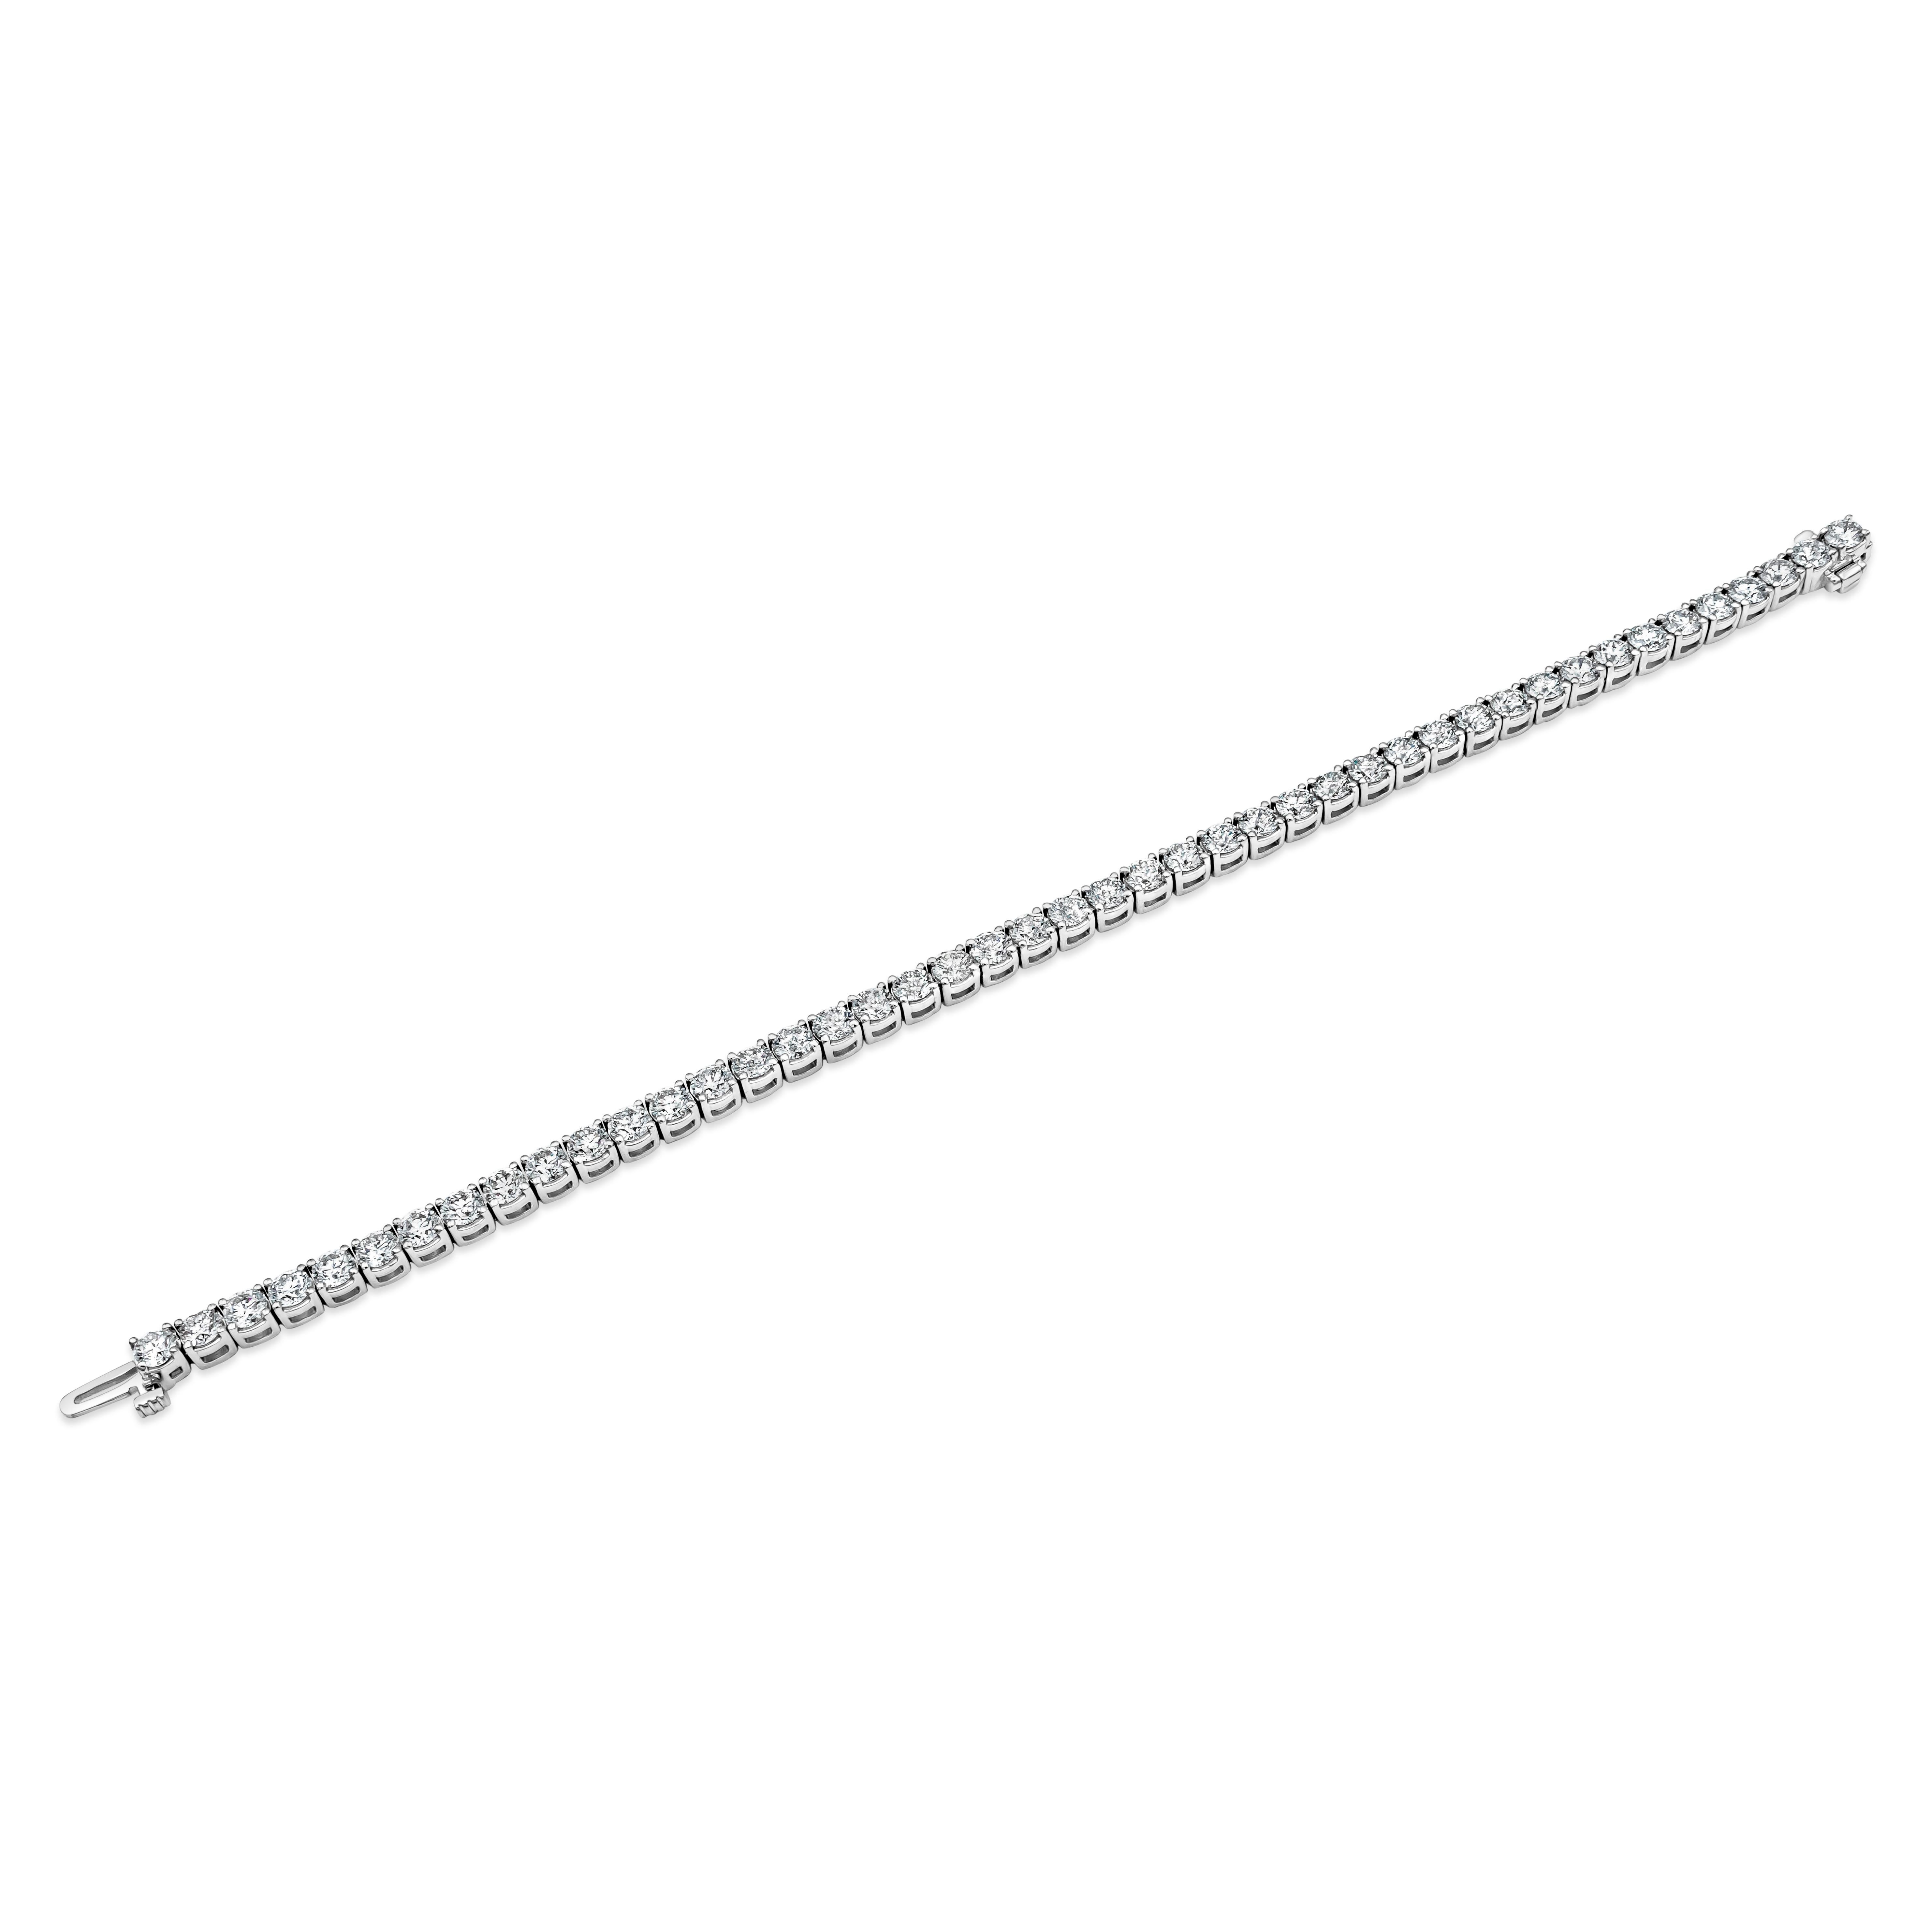 This tennis bracelet has a total of 45 brilliant round diamonds that has a stone size of 3.70mm. Diamonds weigh 8.71 carats total, G color, SI2/I1 clarity. Made in 14K White Gold. 7 inches length.

Roman Malakov is a custom house, specializing in